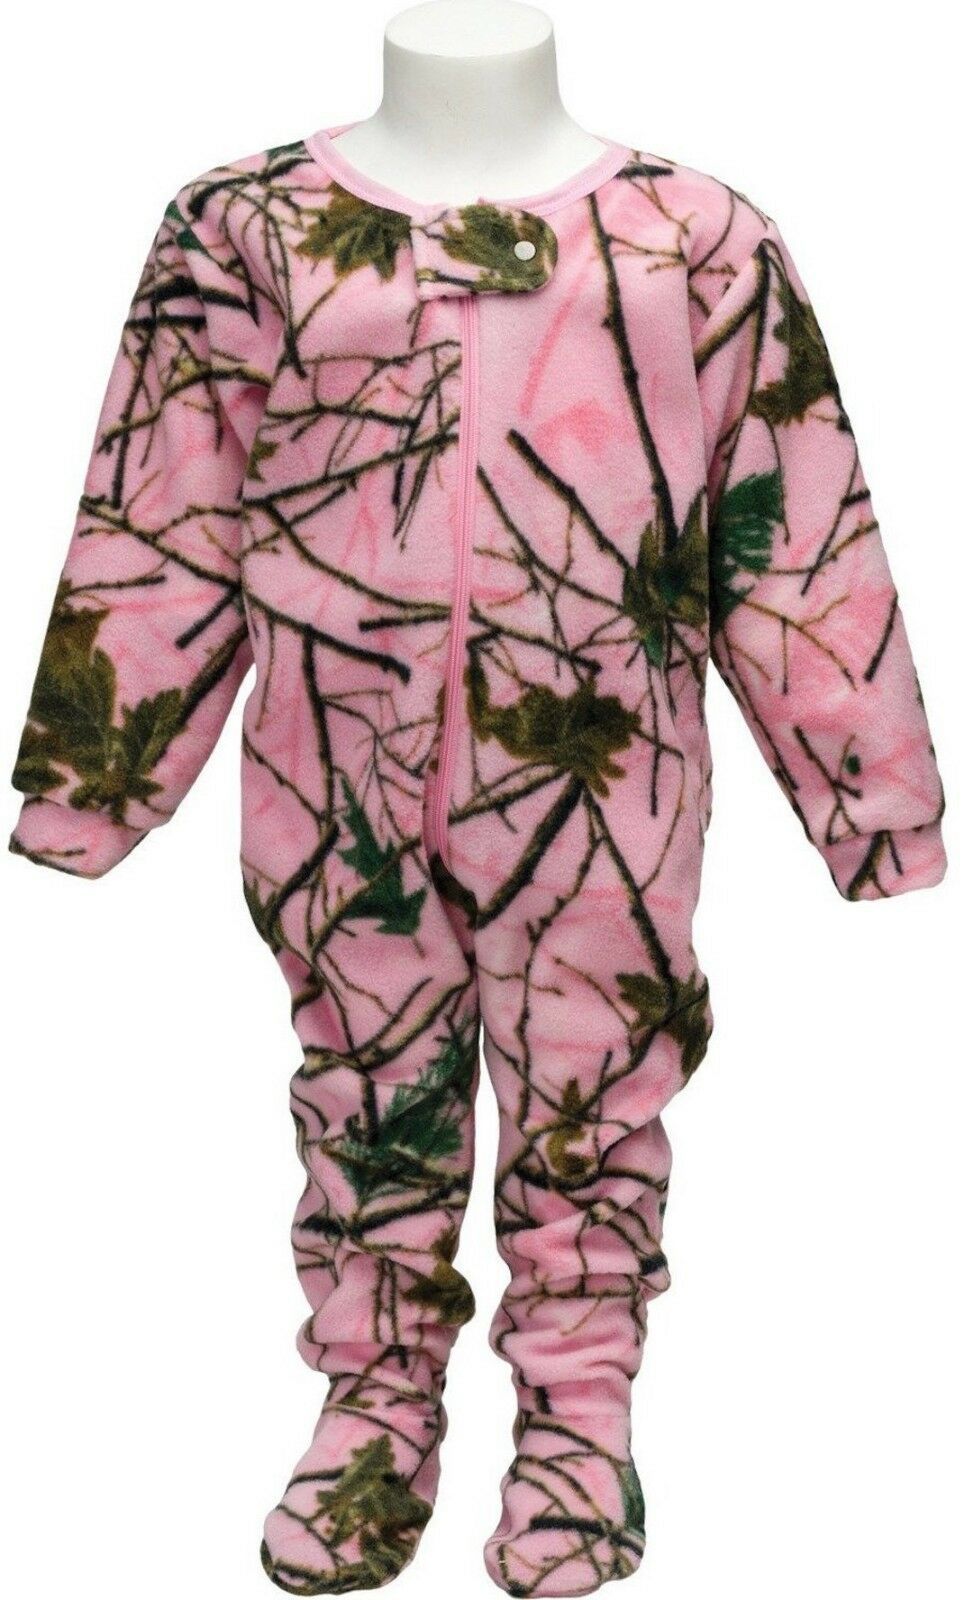 TrailCrest Infant Toddler Camouflage Footies Girls Pajama Pink Sweatsuit Sleeper